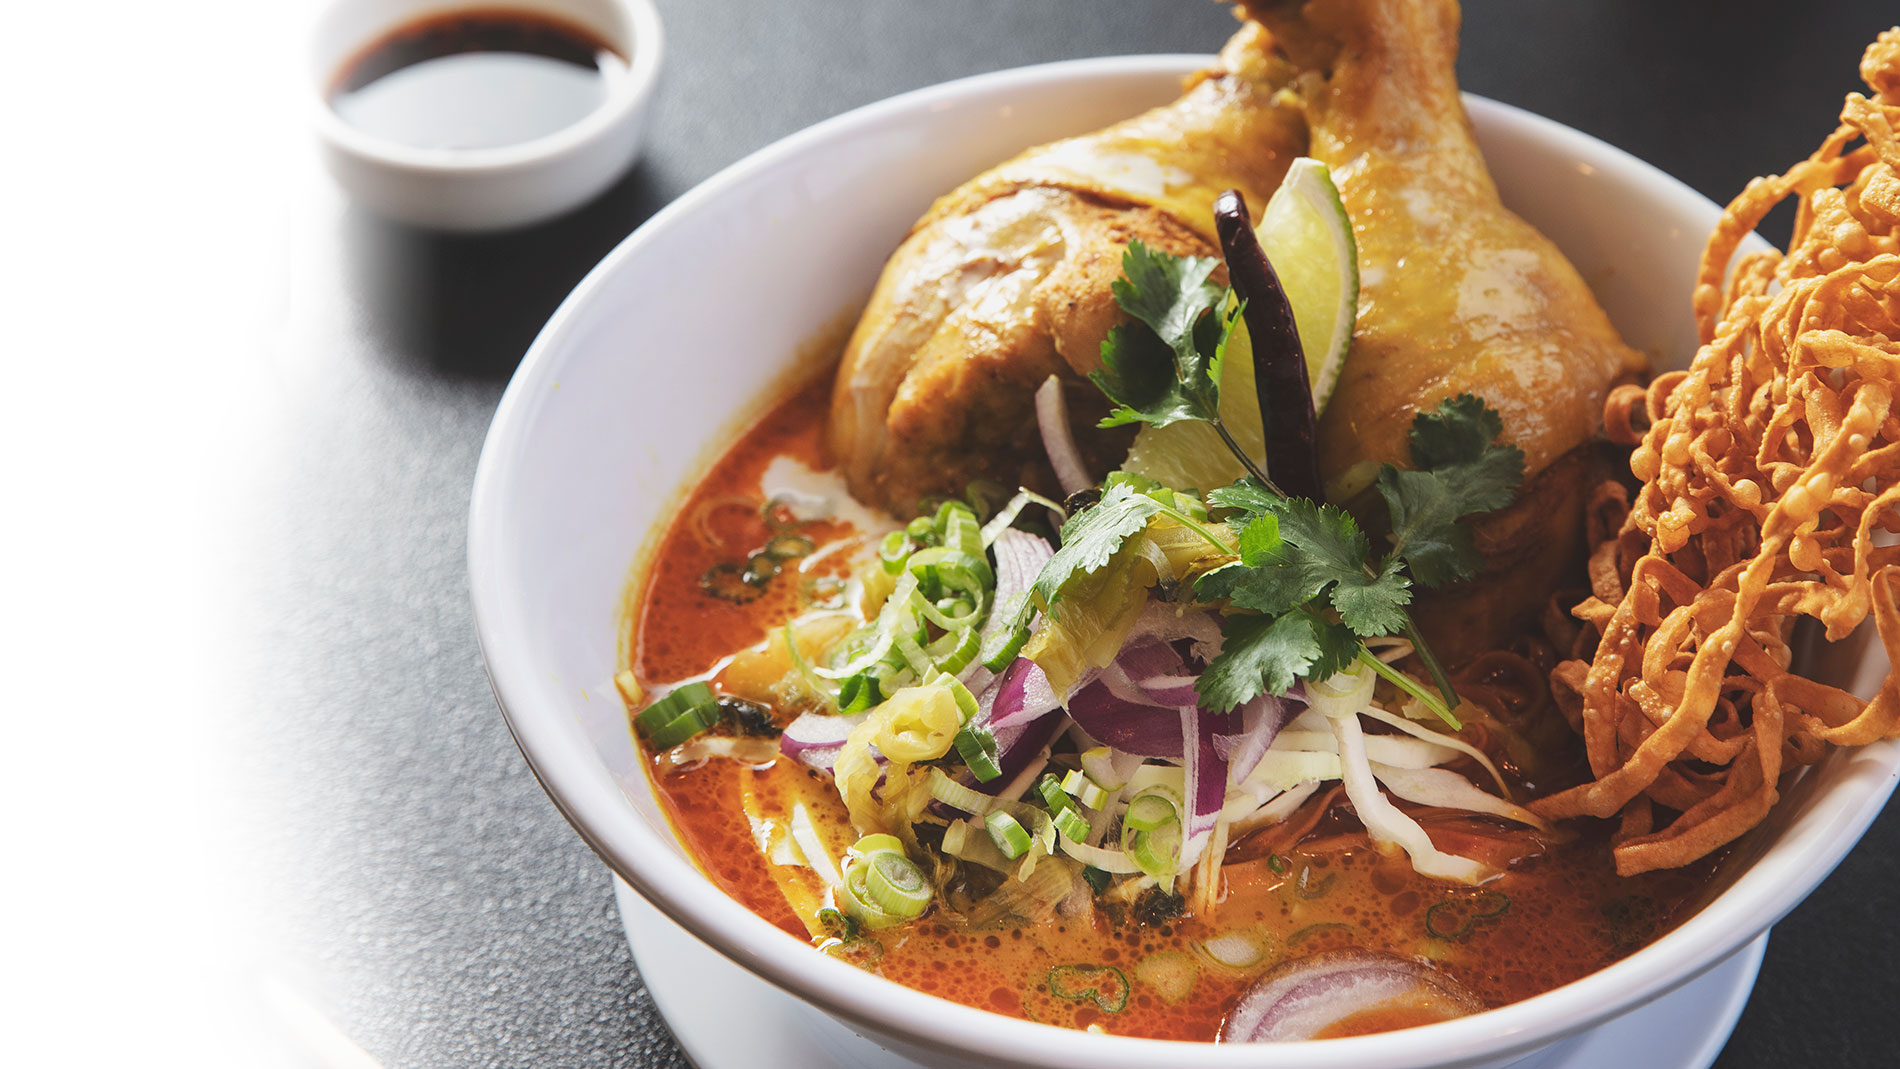 khao soi at chiang mai in webster groves